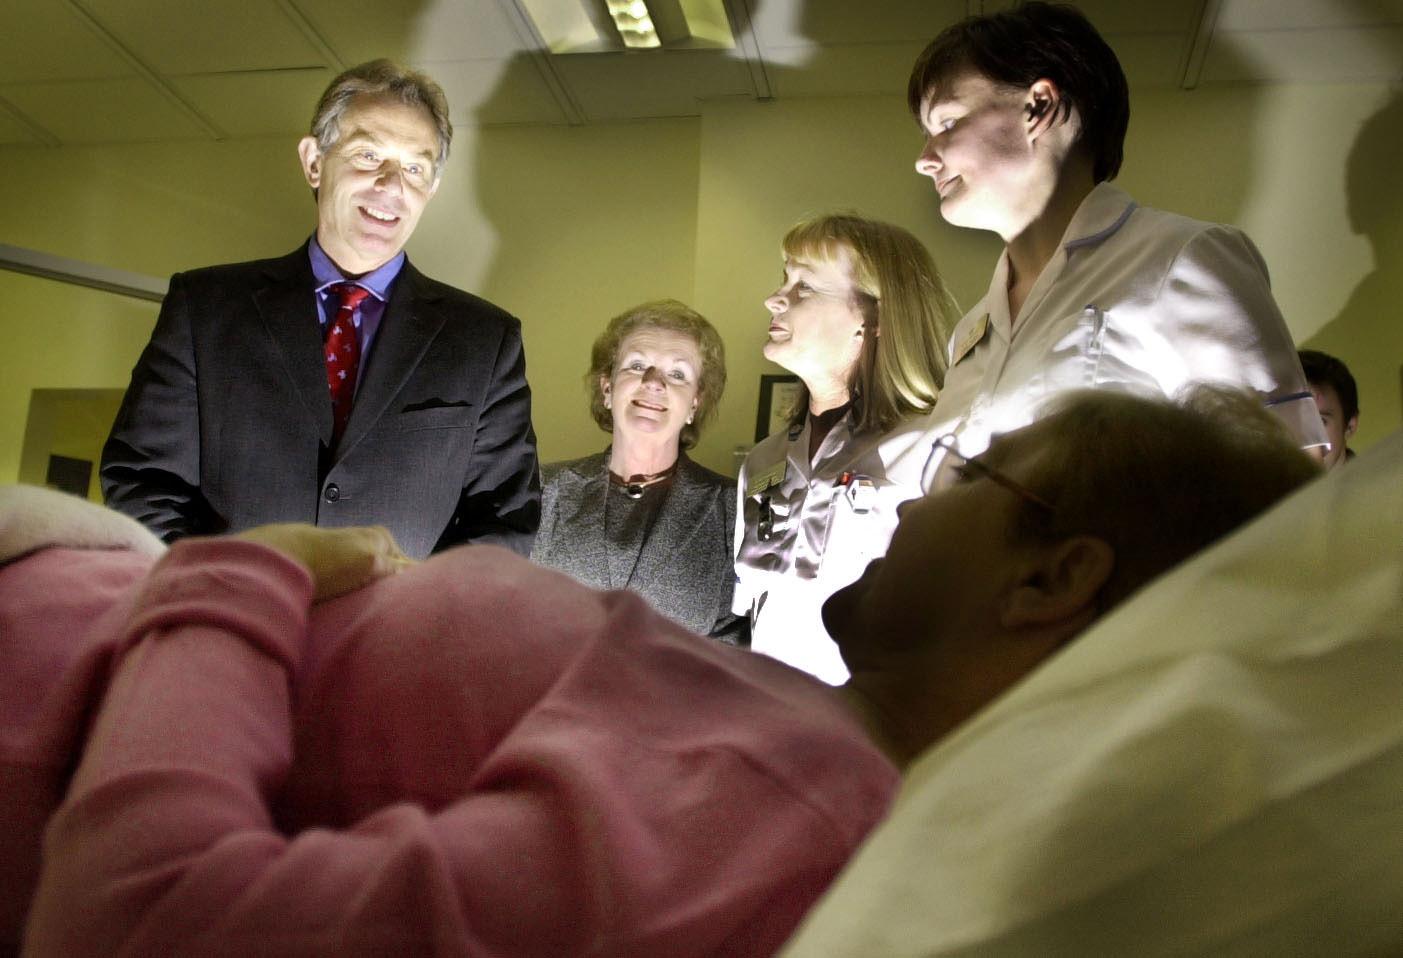 Tony Blair and then-Scottish Secretary Helen Liddell during a 2003 visit to Edinburgh`s Royal Infirmary, which was built under a Private Finance Initiative (PFI) deal